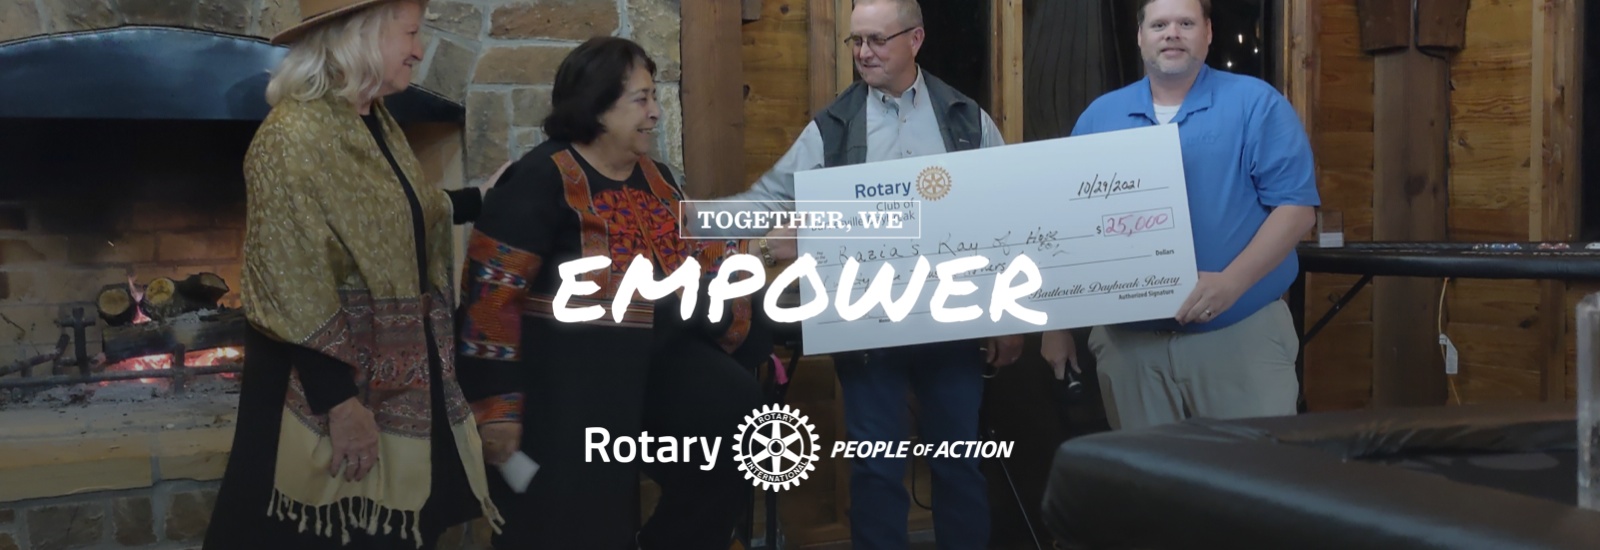 Rotary - People of Action. Together, we Empower